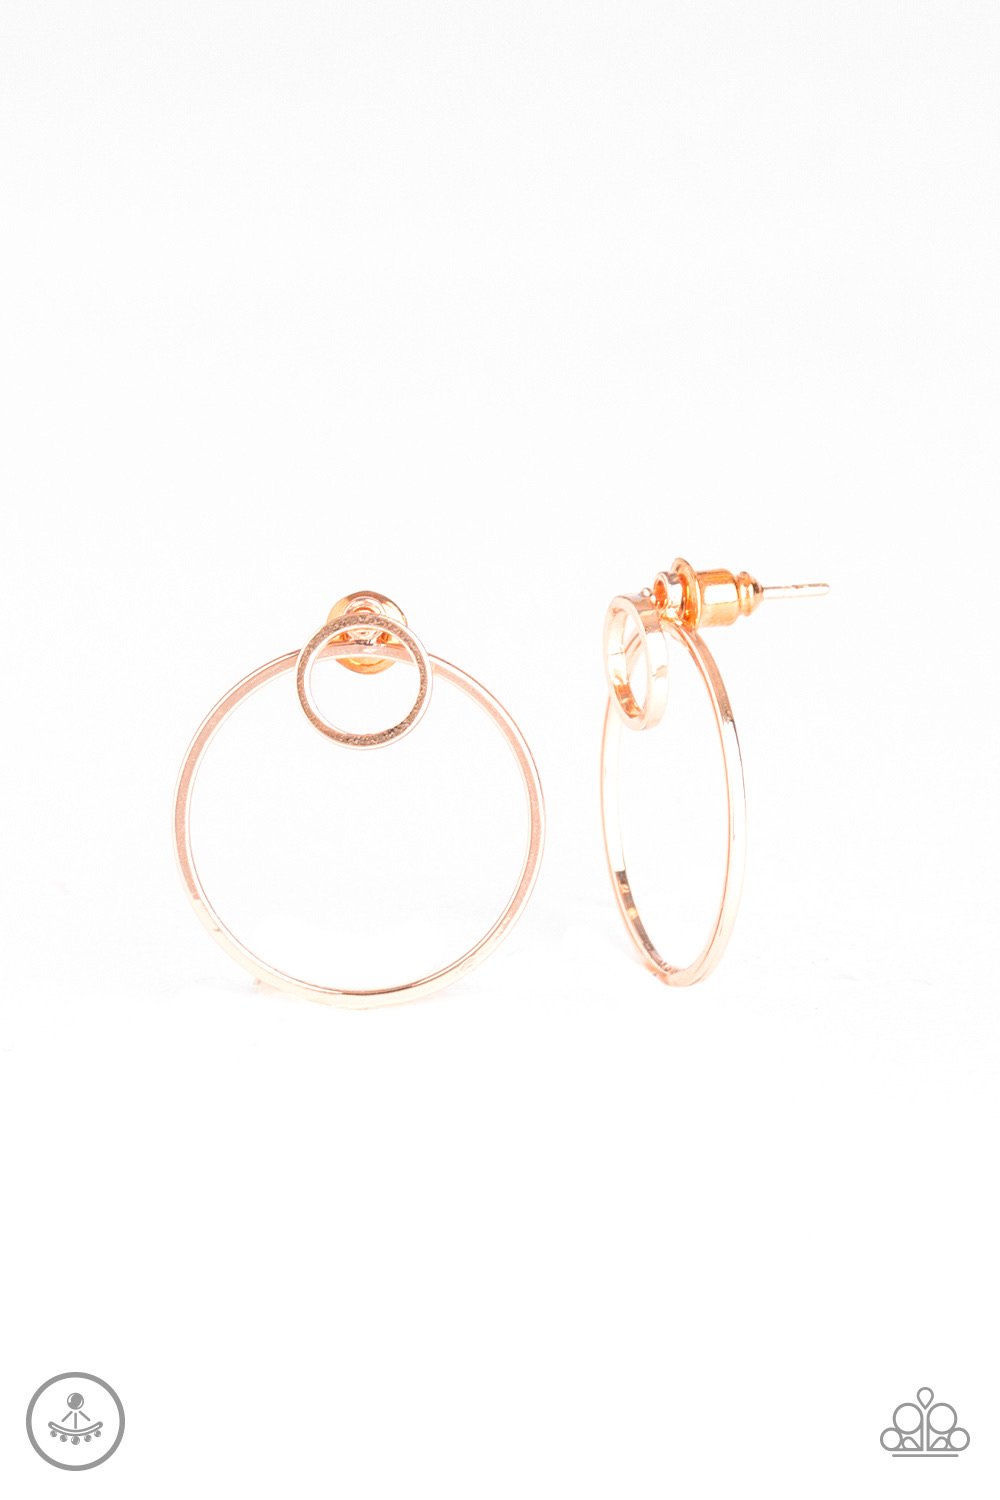 Spin Cycle - Paparazzi - Rose Gold Post Earrings